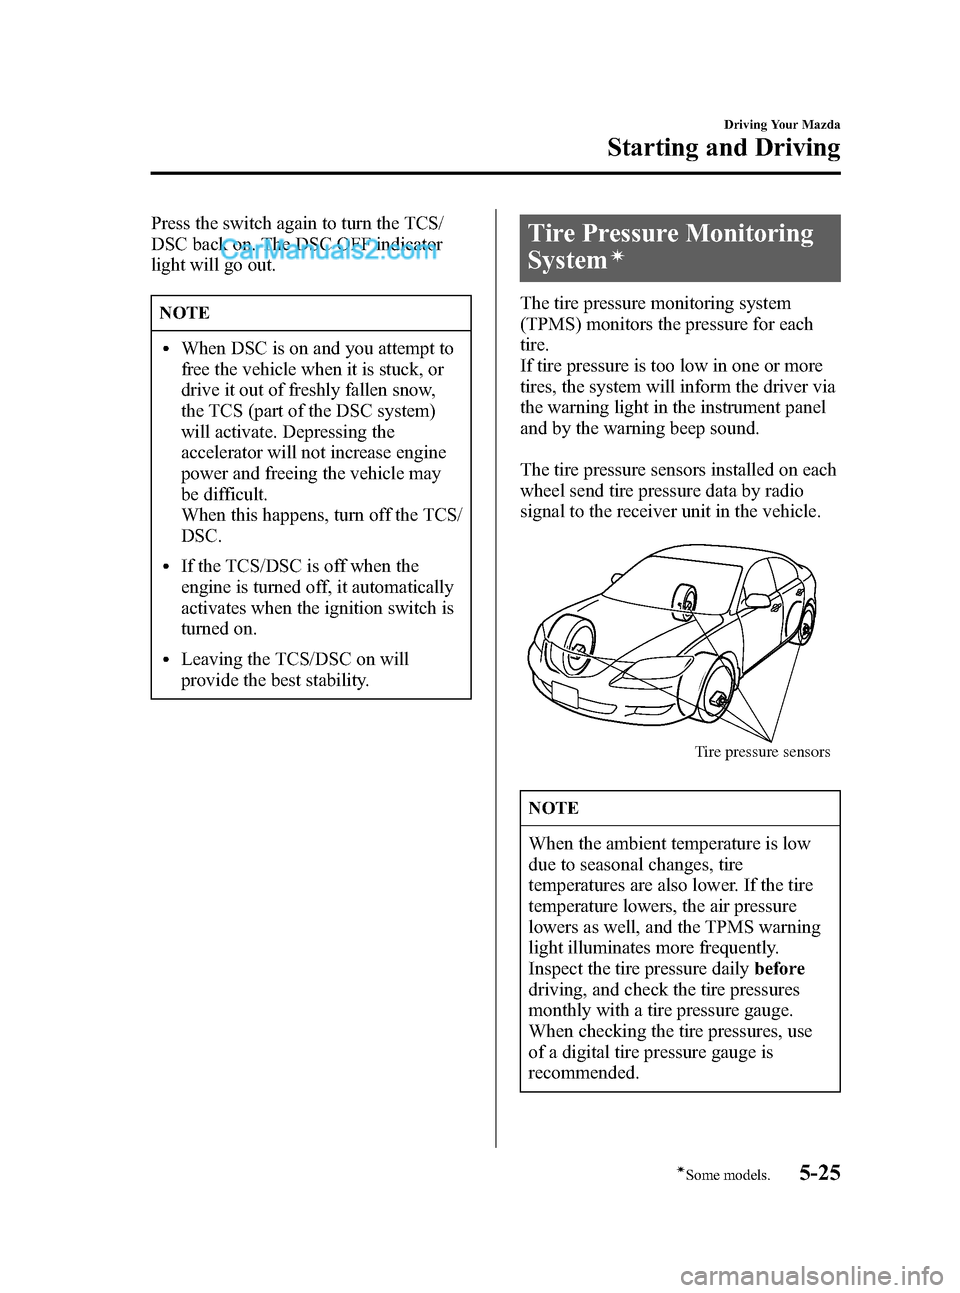 MAZDA MODEL MAZDASPEED 3 2007  Owners Manual (in English) Black plate (147,1)
Press the switch again to turn the TCS/
DSC back on. The DSC OFF indicator
light will go out.
NOTE
lWhen DSC is on and you attempt to
free the vehicle when it is stuck, or
drive it